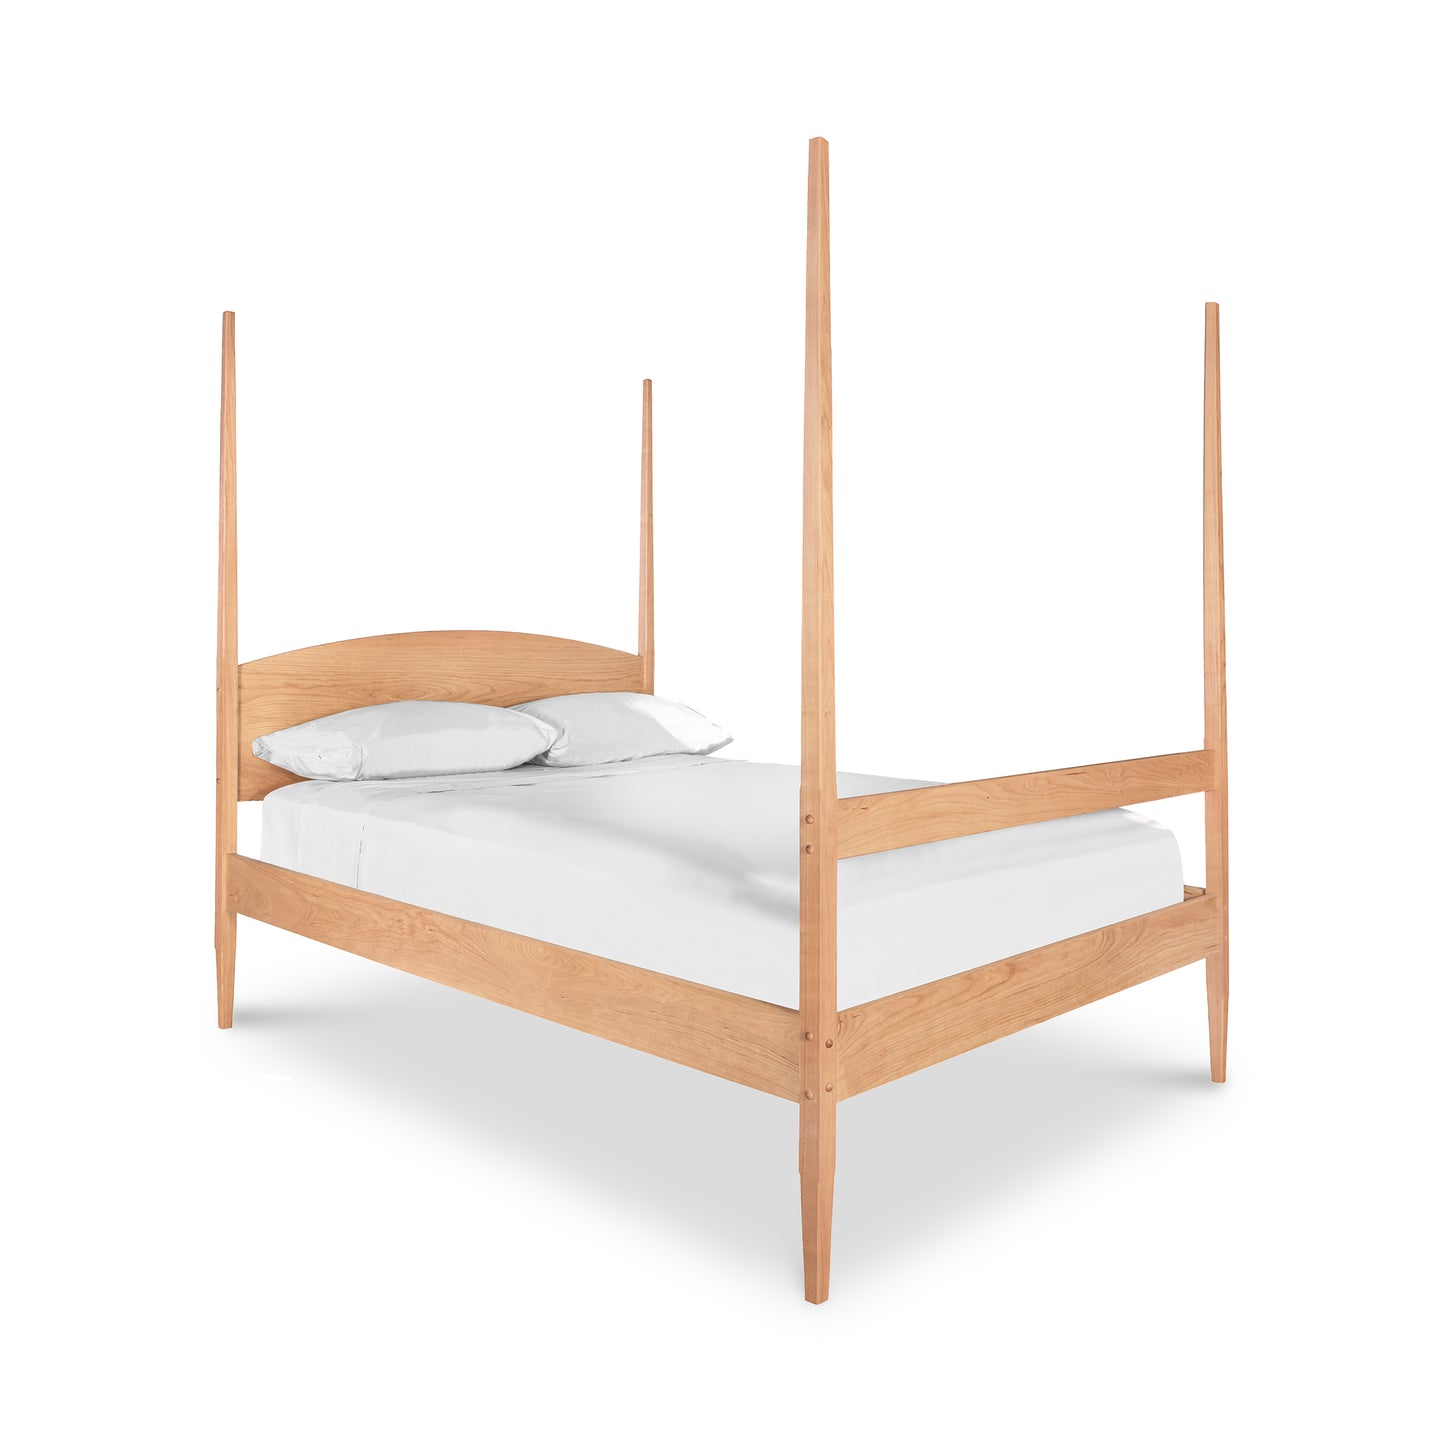 A minimalistic Vermont Shaker Four Poster Bed made of light wood, featuring a simple headboard and a white mattress with pillows, set against a plain white background. Brand: Maple Corner Woodworks.